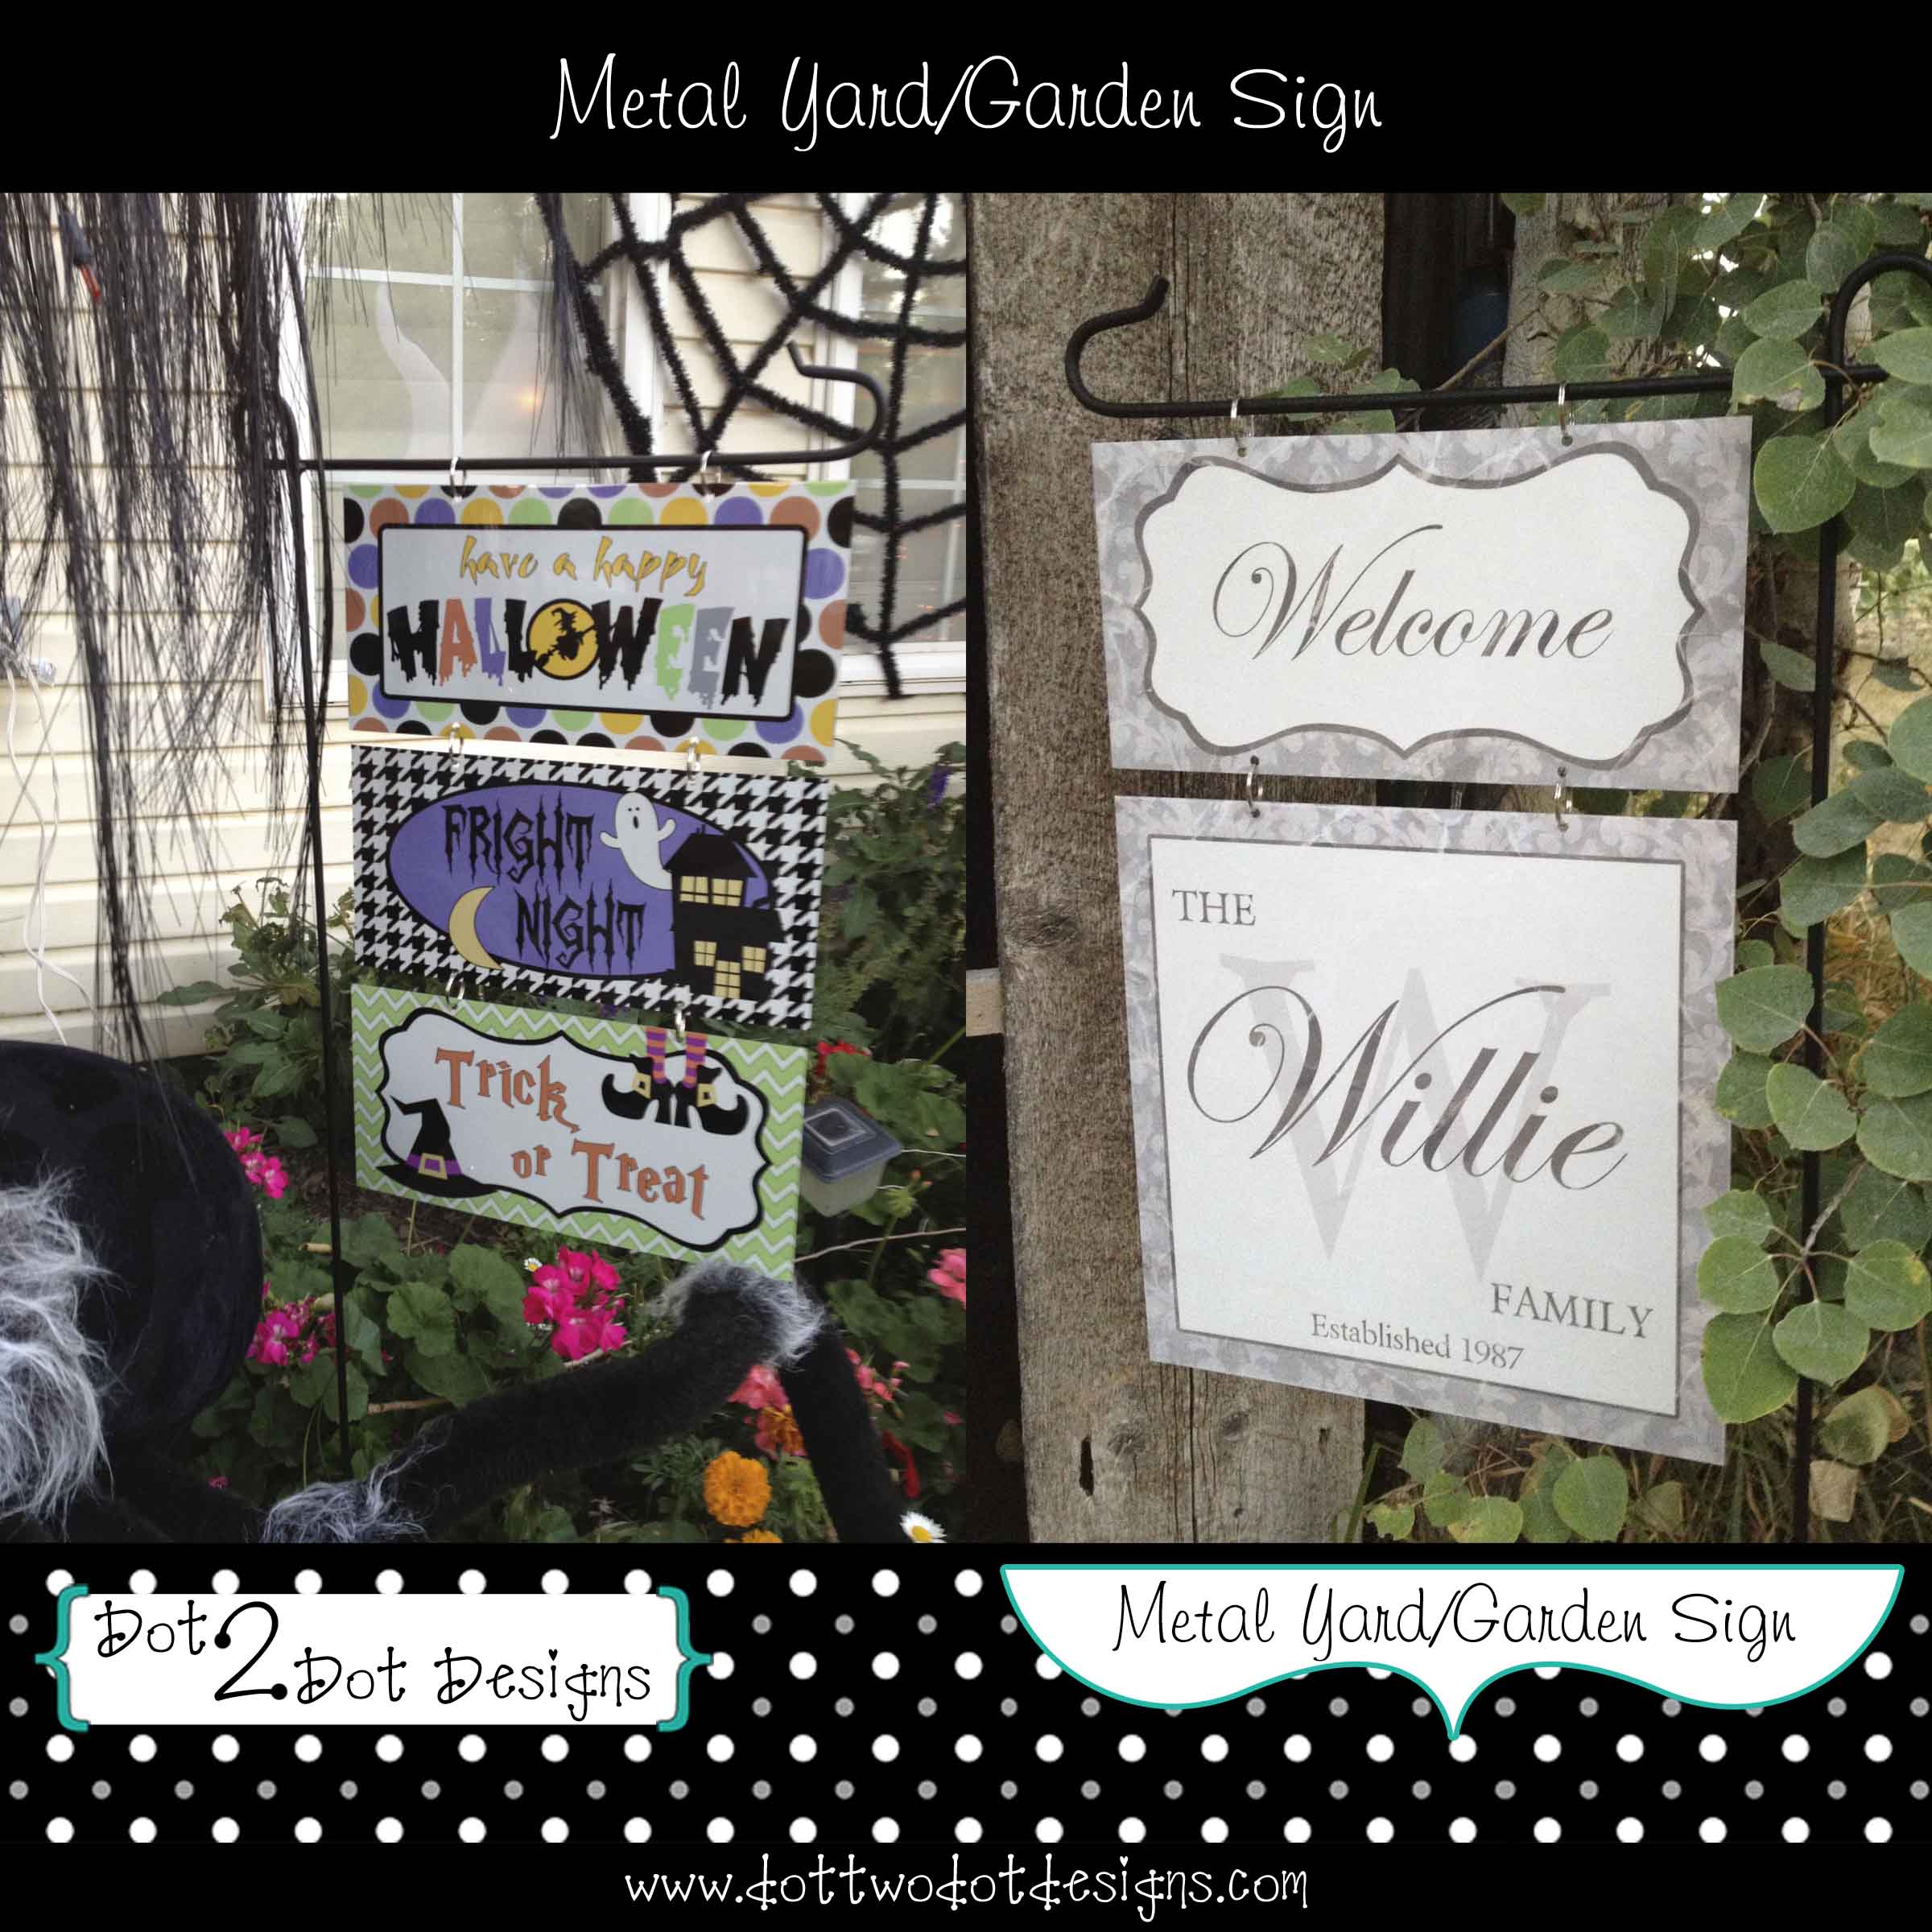 Metal Art Contest - Metal Yard/Garden Signs made with sublimation printing